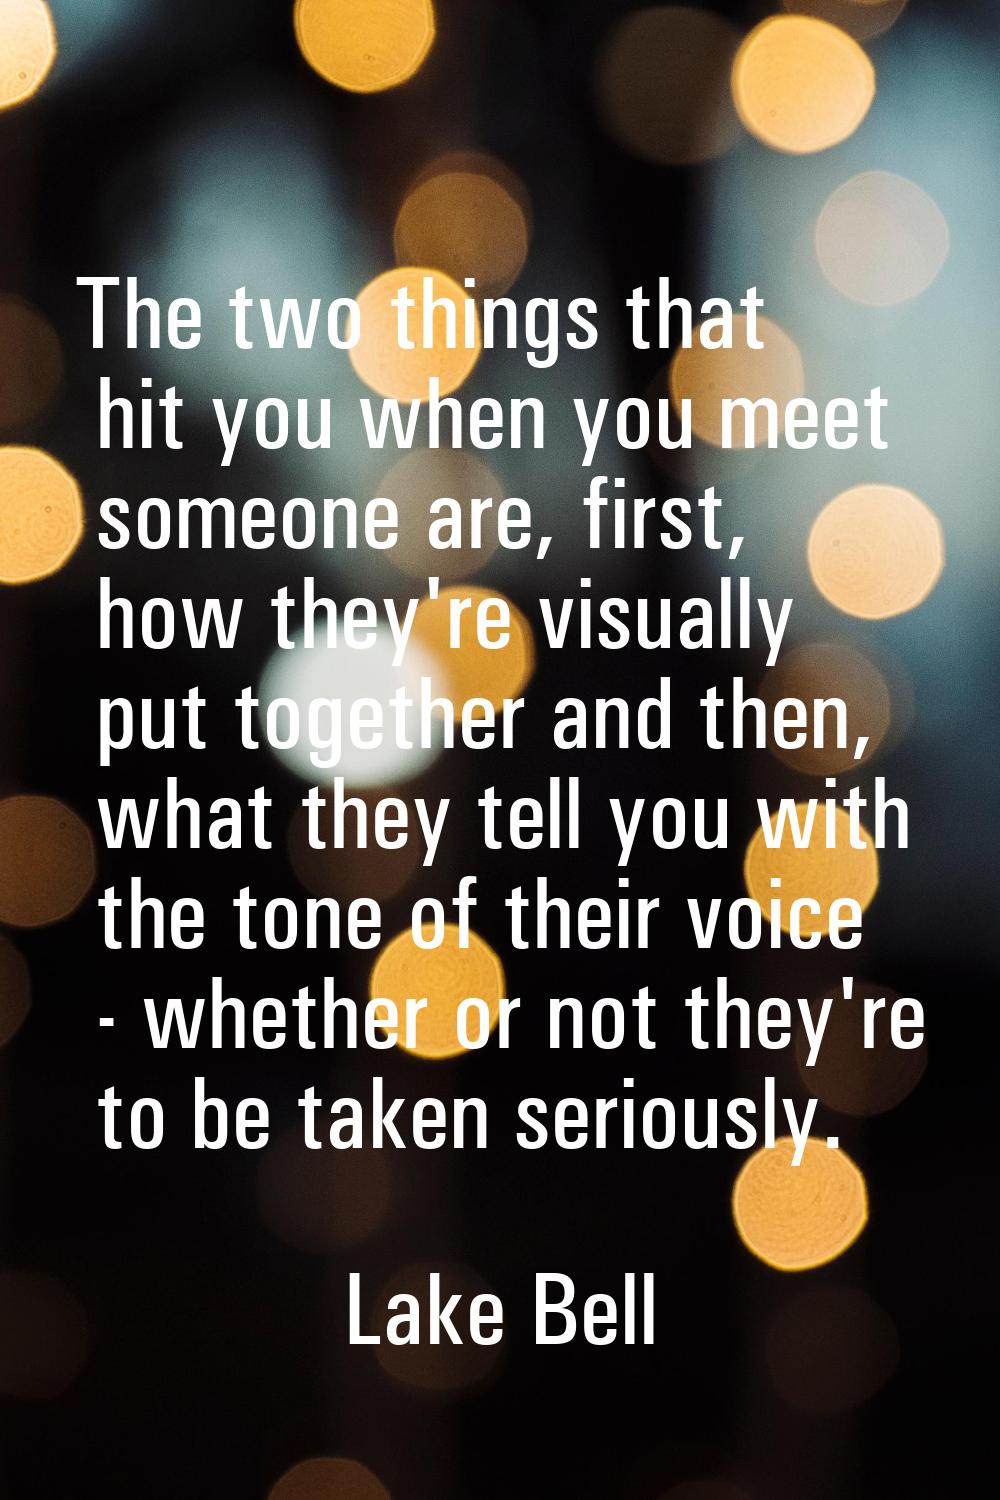 The two things that hit you when you meet someone are, first, how they're visually put together and